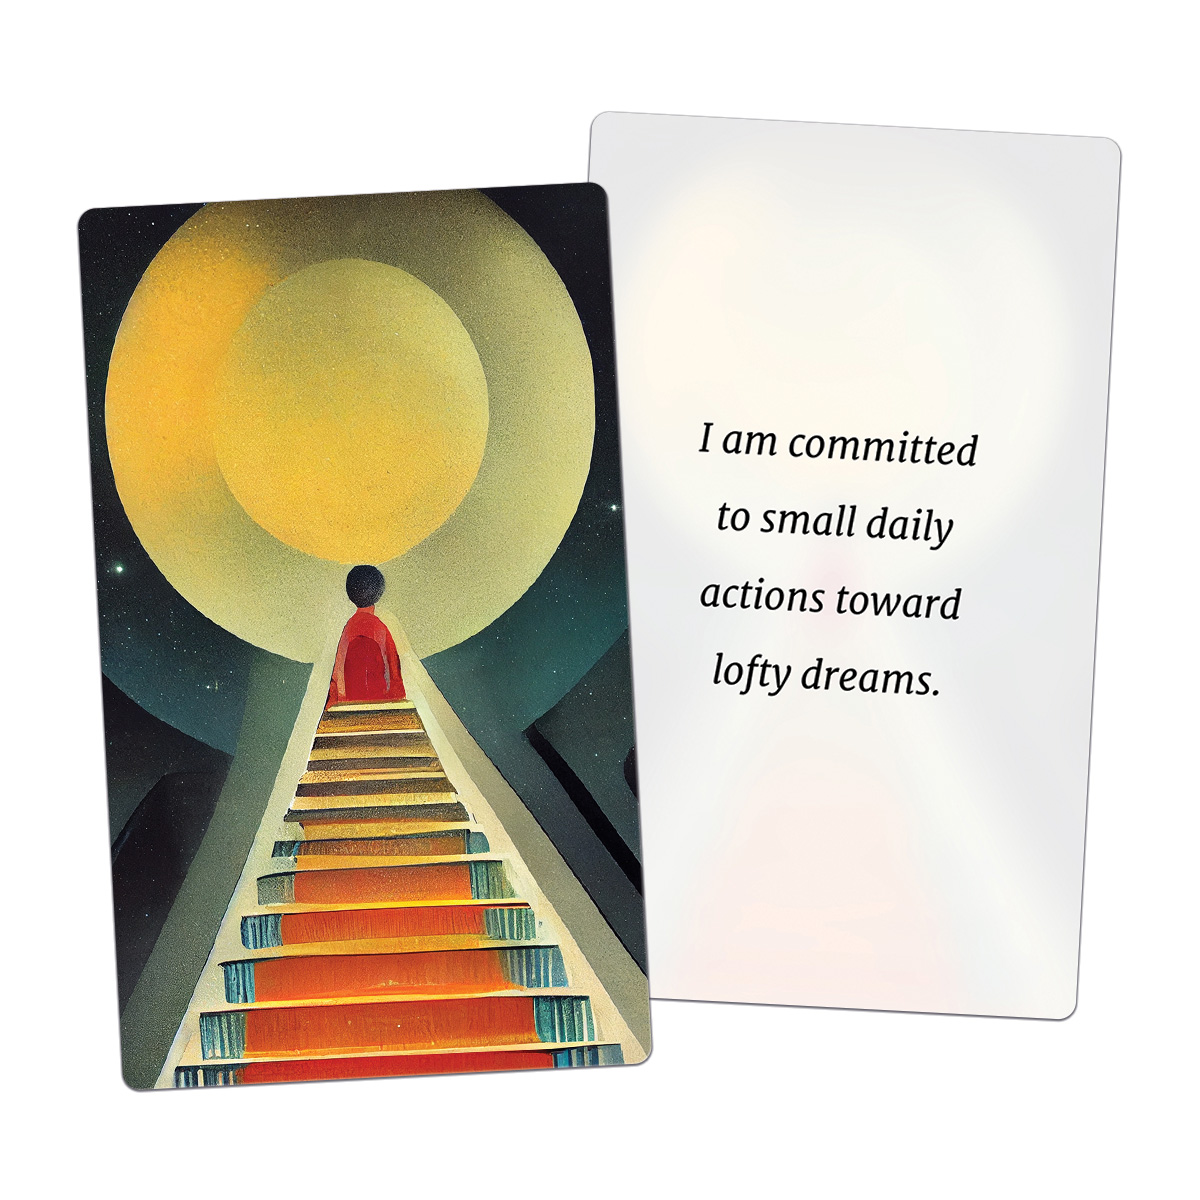 I am committed to small daily actions toward lofty dreams. (AFFIRMATION CARD)